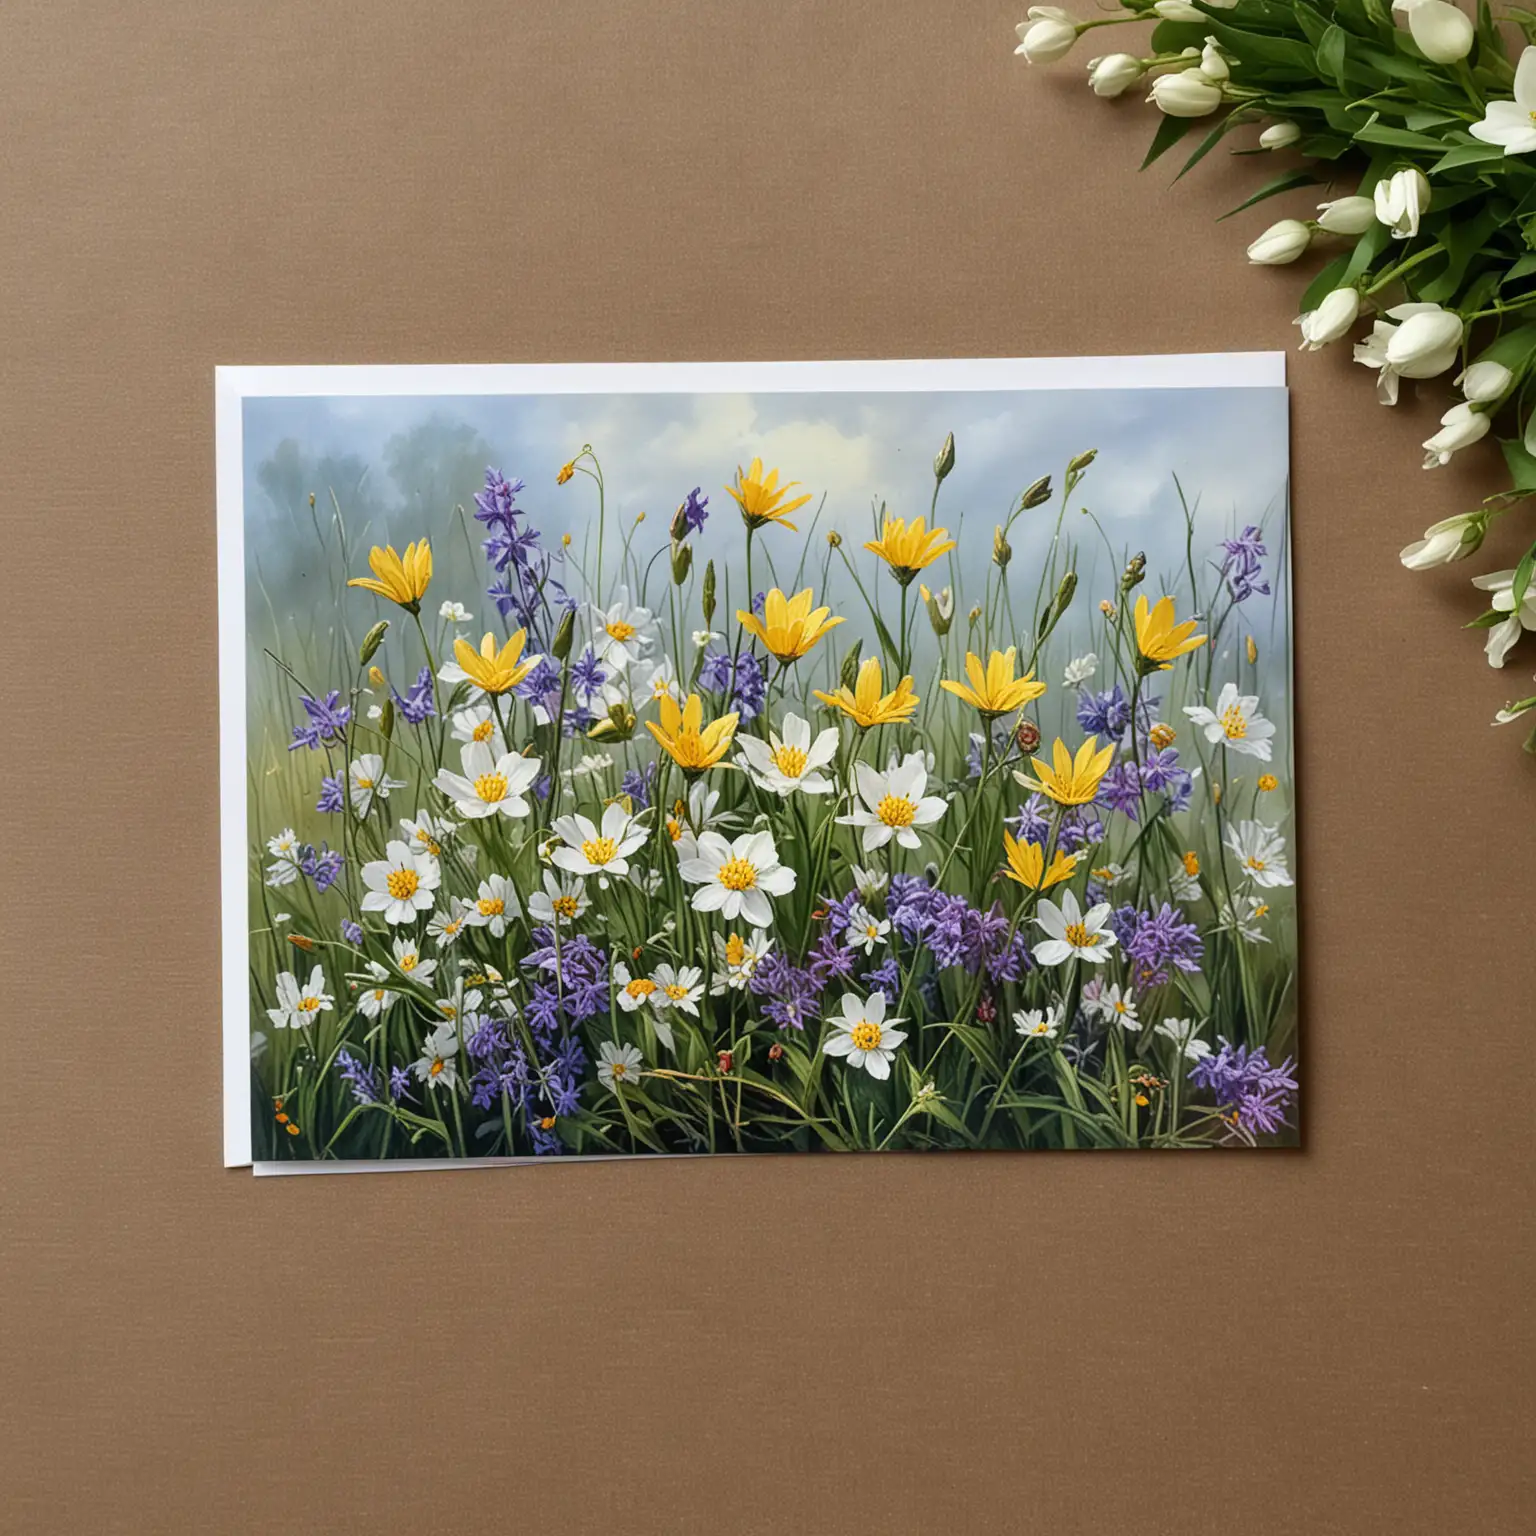 Greeting card to be created as an oil painting with wild Easter flowers